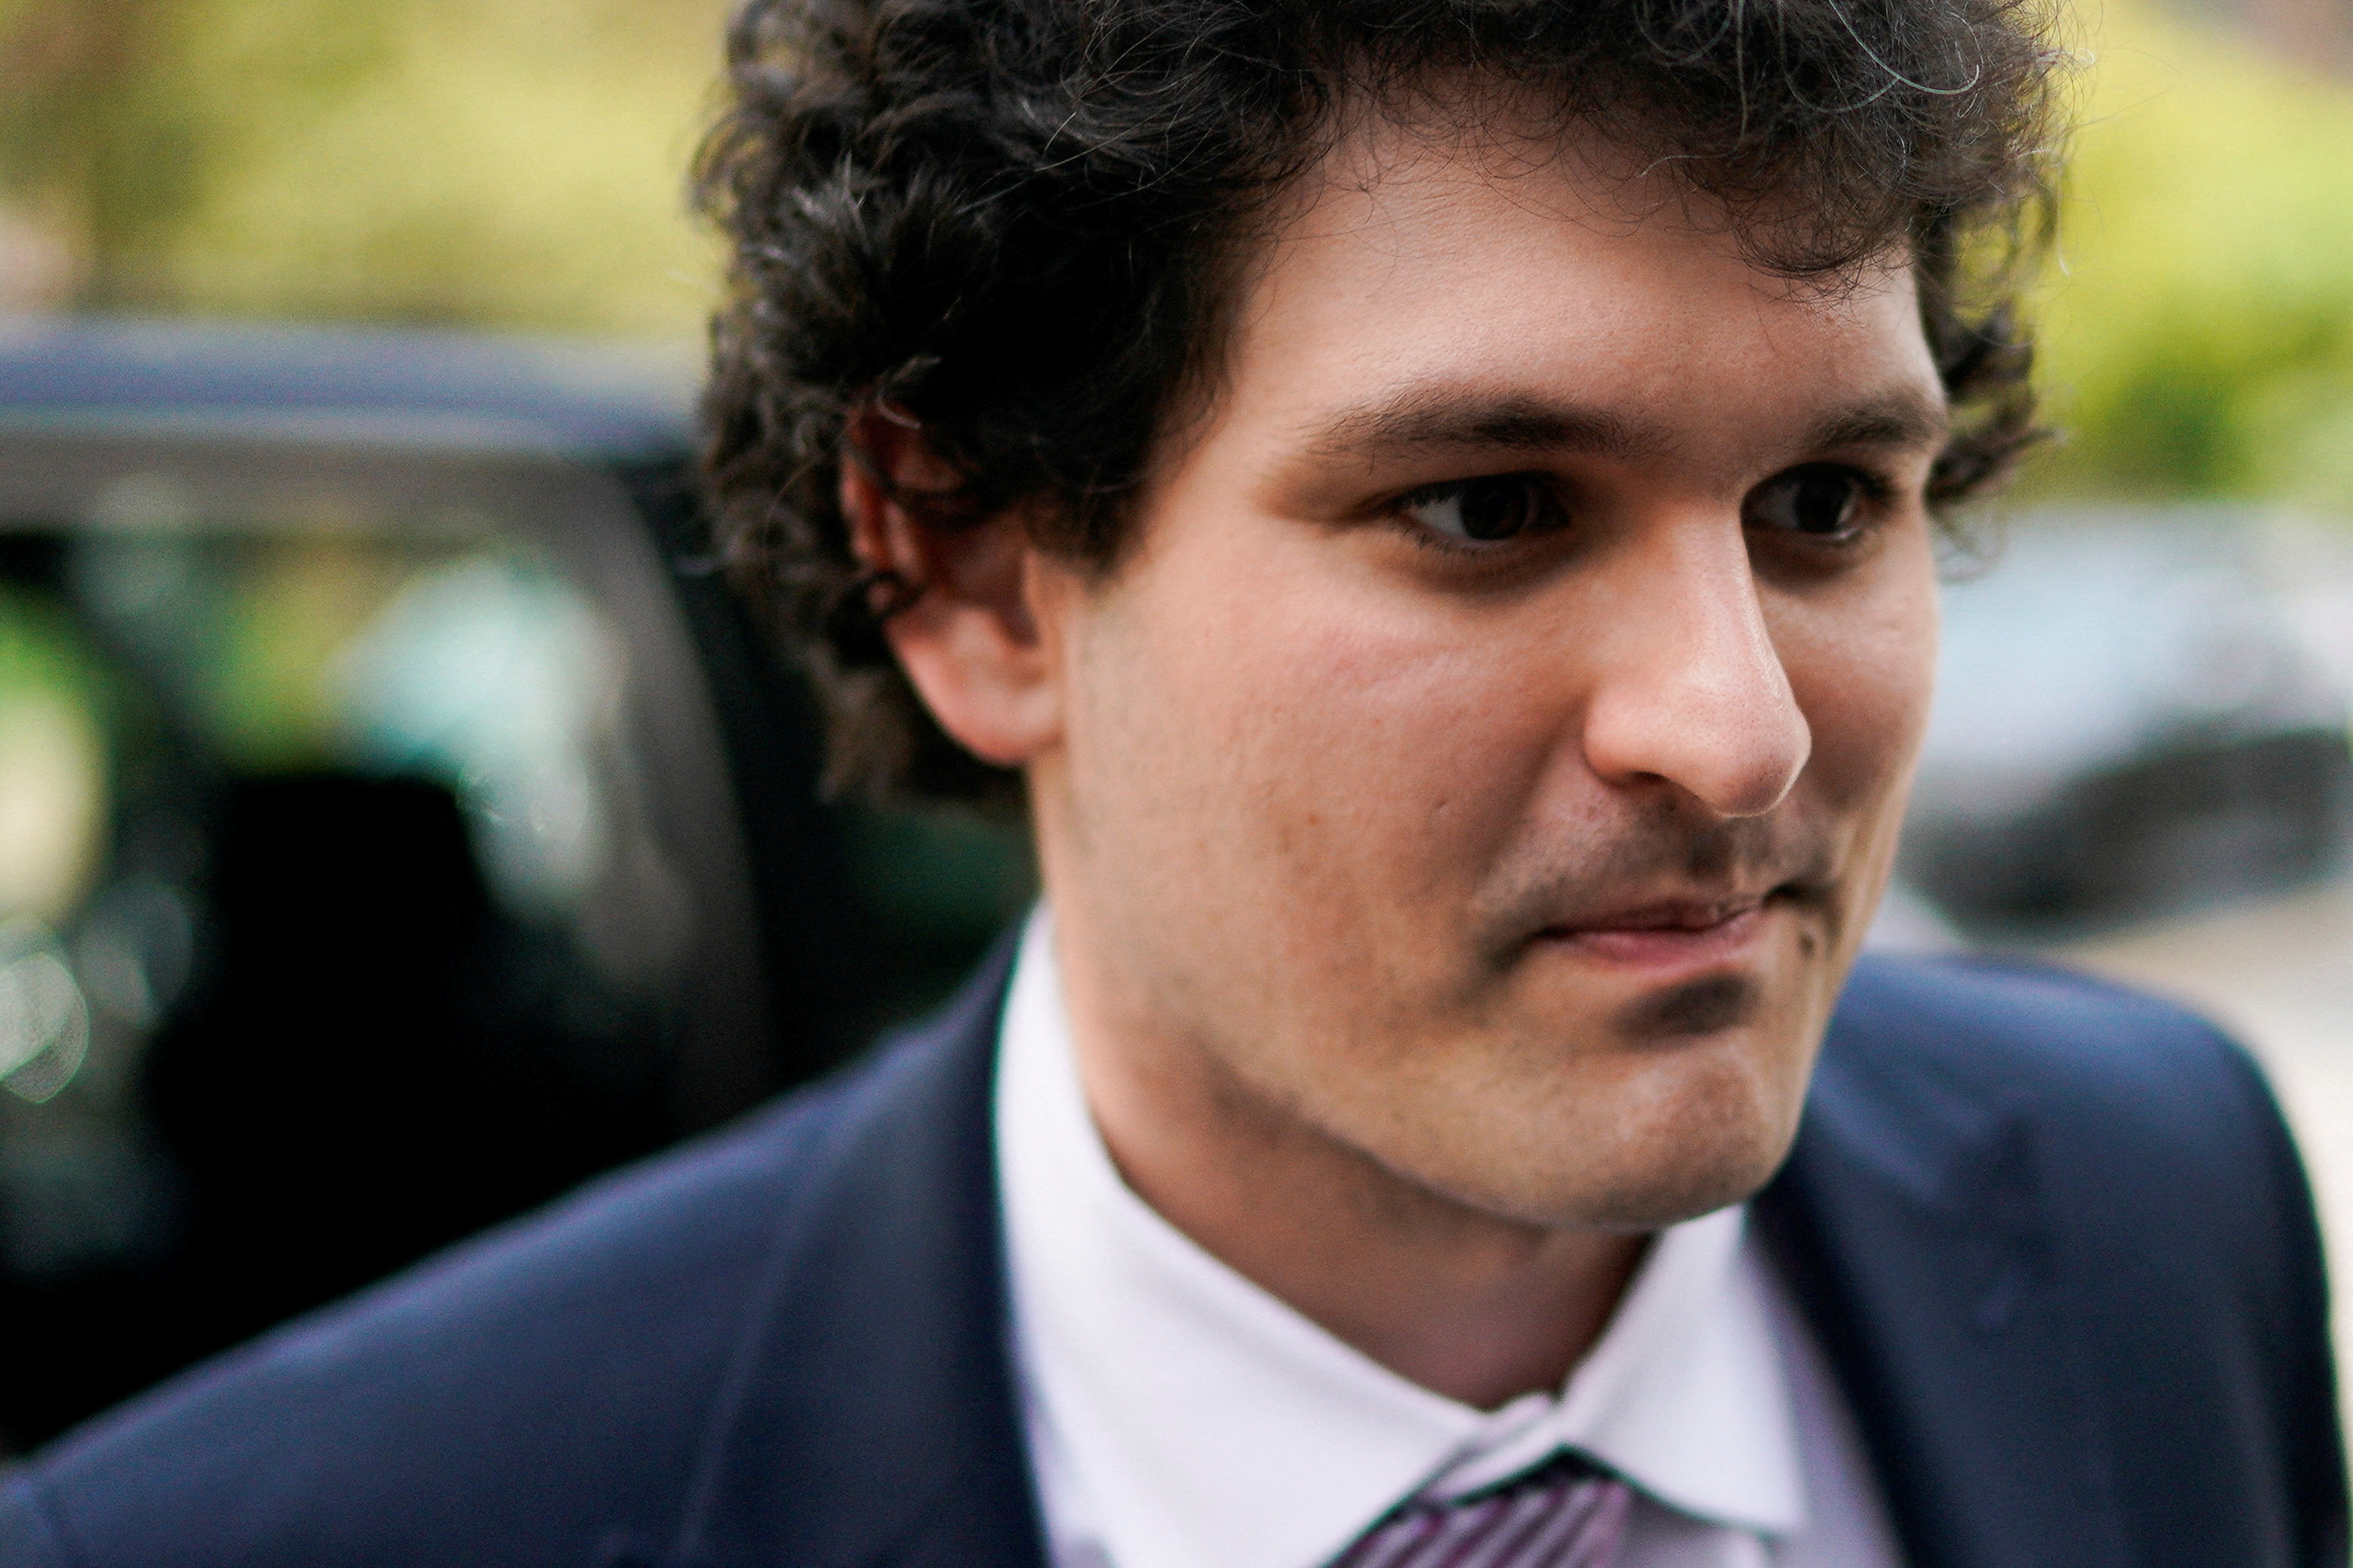 Sam Bankman-Fried, the founder of bankrupt cryptocurrency exchange FTX, arrives at court in New York on Friday. Photo: Reuters